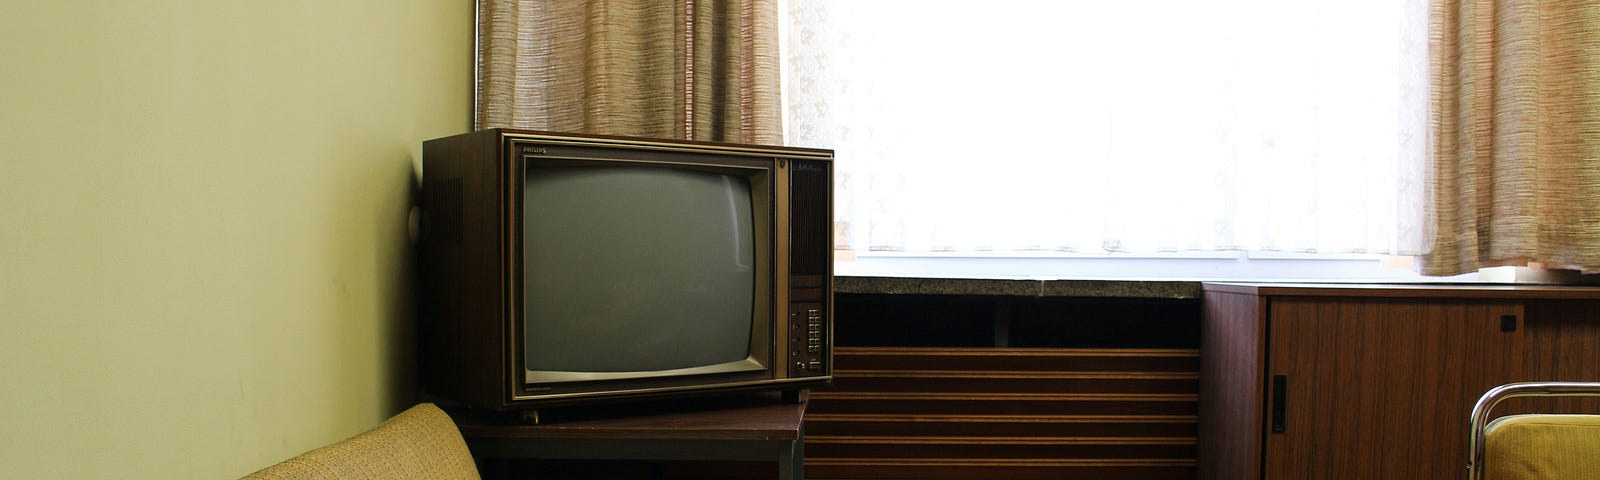 Vintage living room with a beige sofa, an old-fashioned television on a side table, and a wooden cabinet with a built-in record player, illuminated by natural light from a window.